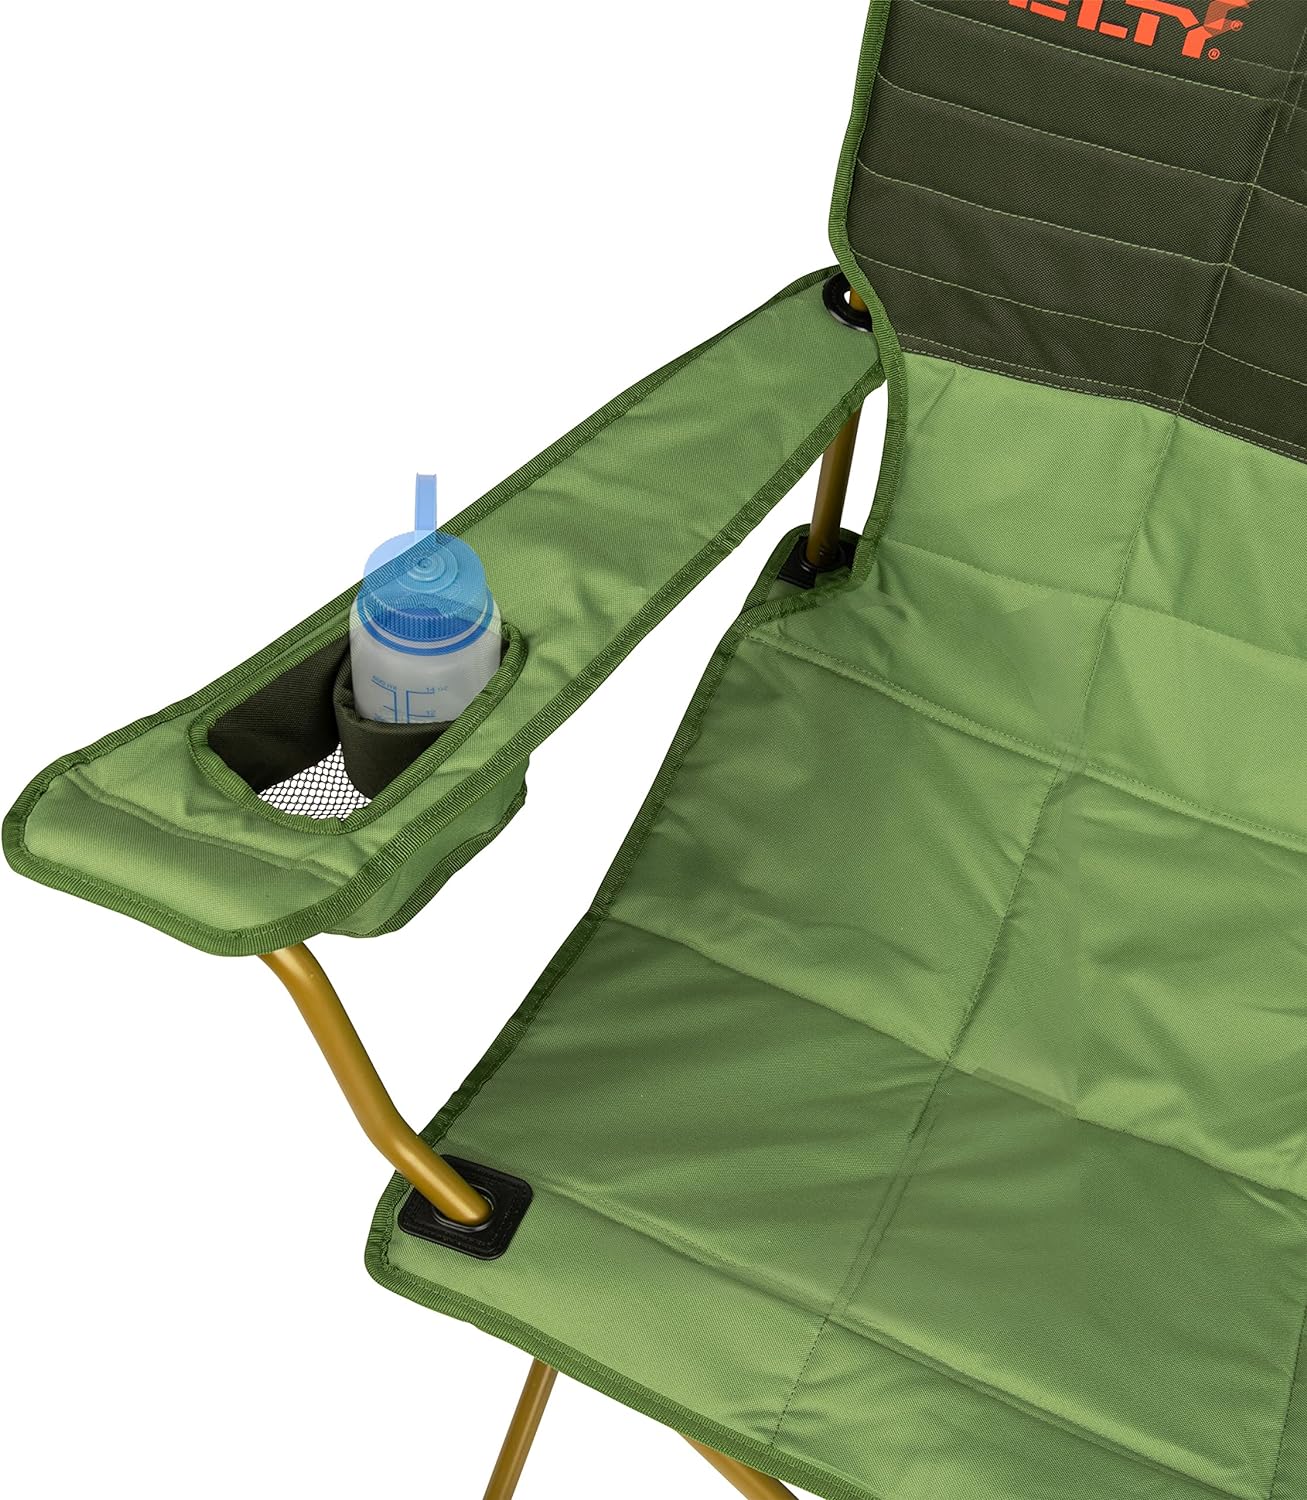 Kelty Lowdown Camping Chair \u2013 Portable, Folding Chair for Festivals, Camping and Beach Days